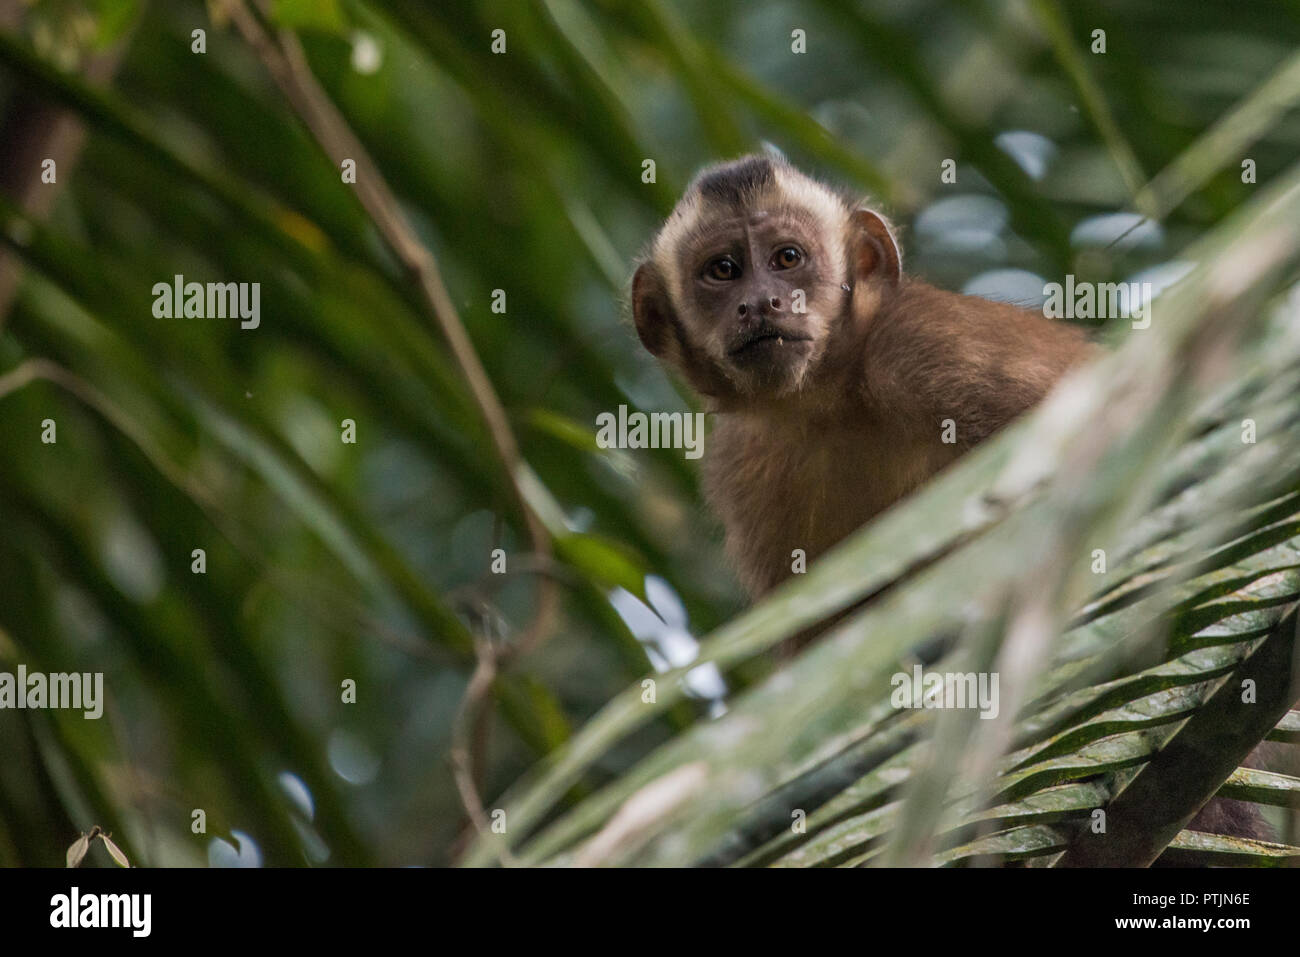 Tufted capuchin (Sapajus apella) formerly known as Cebus apella looking at the photographer in the Amazon rainforest. Stock Photo